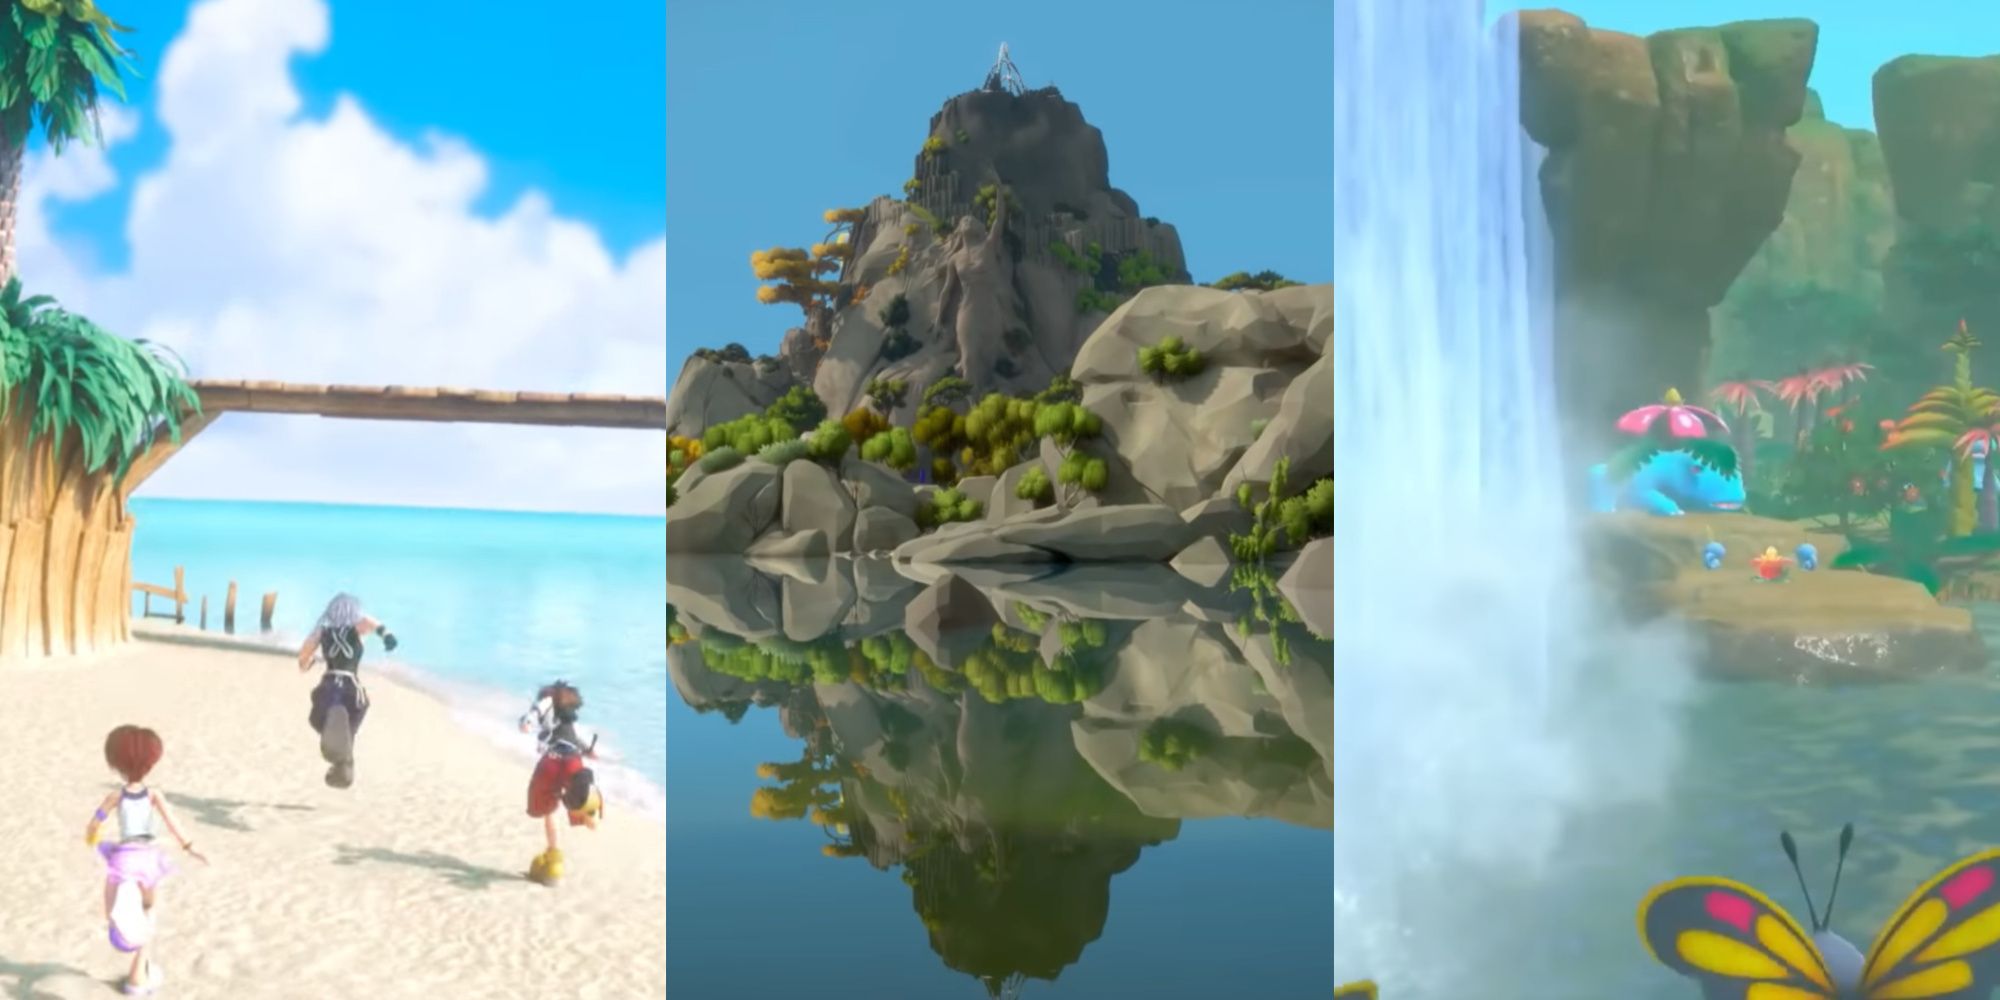 Cover Image for Best Video Game Islands featuring Destiny Islands from Kingdom Hearts, the Island from The Witness, and the Lental Region from New Pokemon Snap